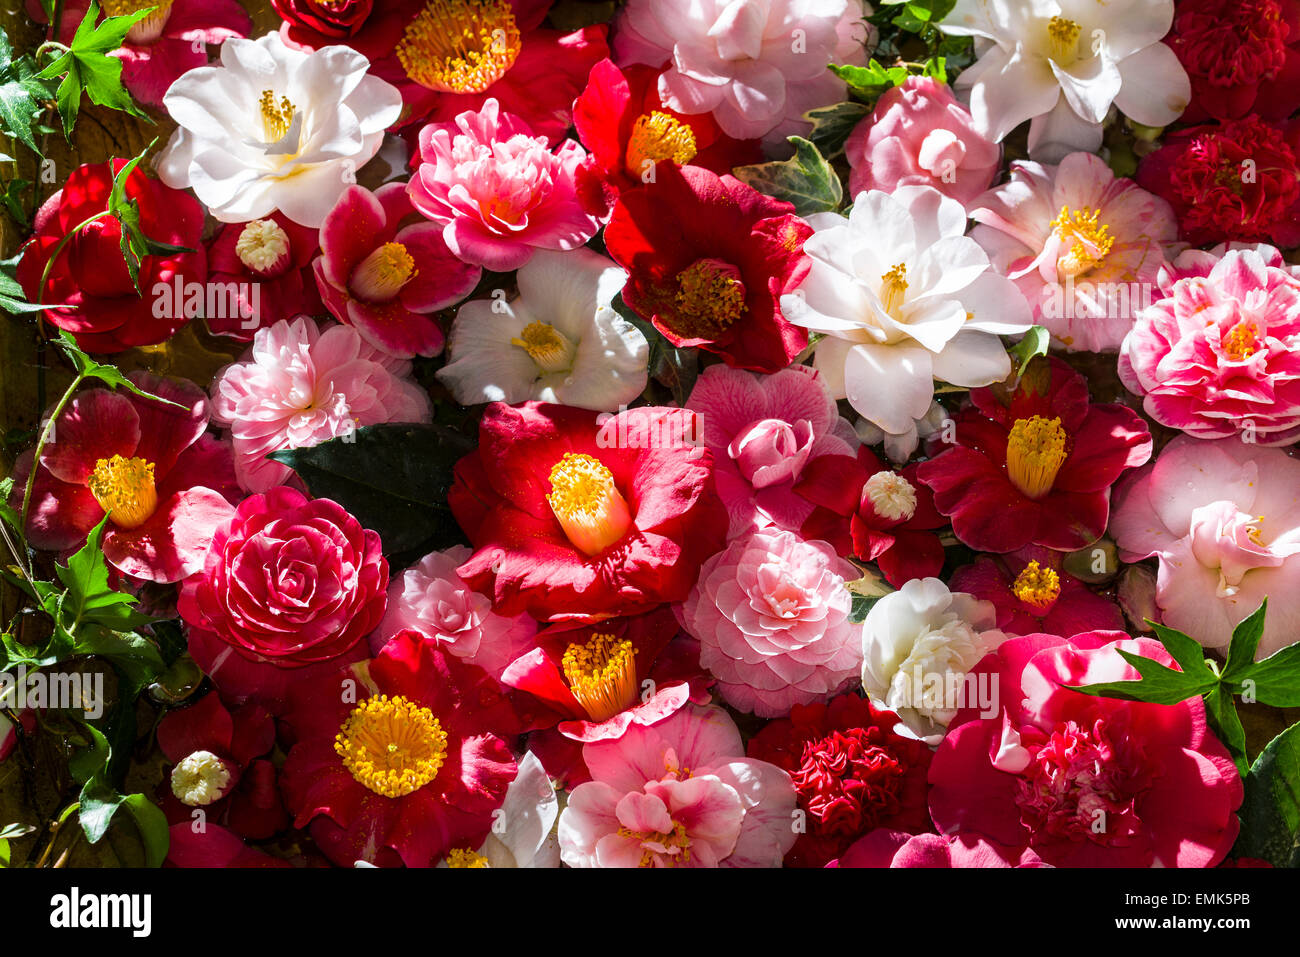 Japanese camellia (Camellia japonica) white and red blossoms Stock Photo